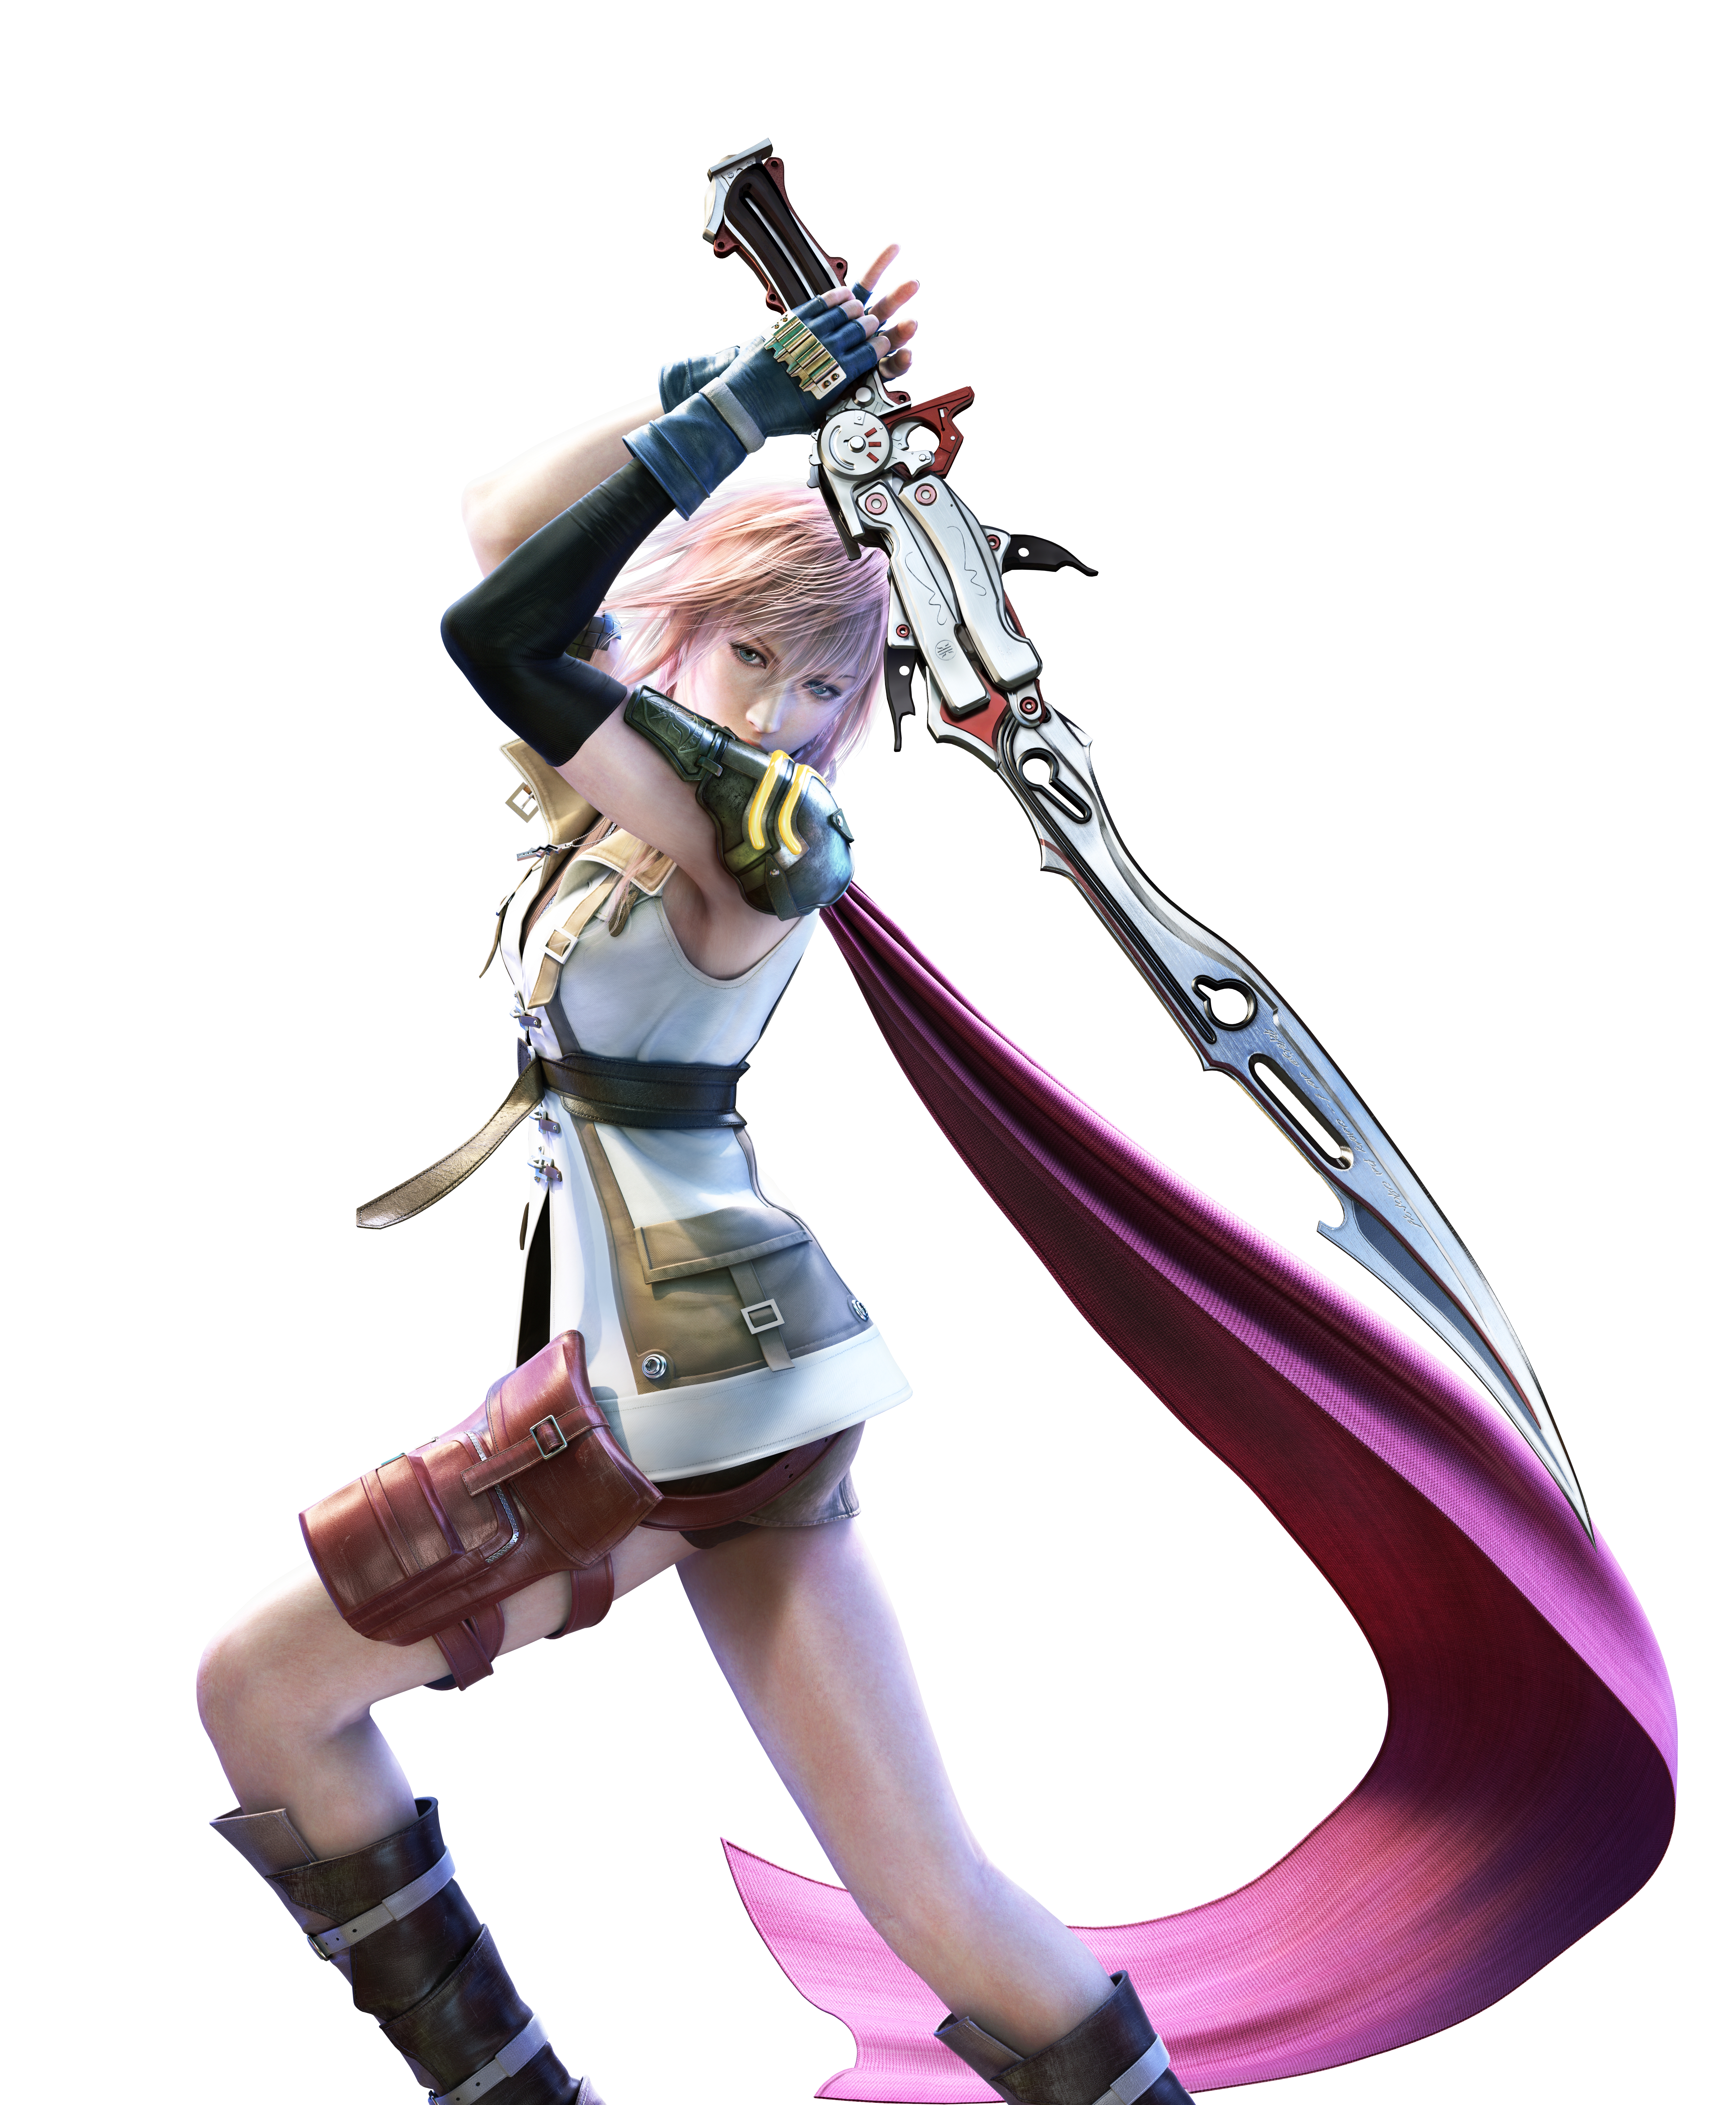 Final Fantasy Xiii Claire Farron Weapon Portrait Display Sword Gloves Fingerless Gloves Video Game C 6400x7760